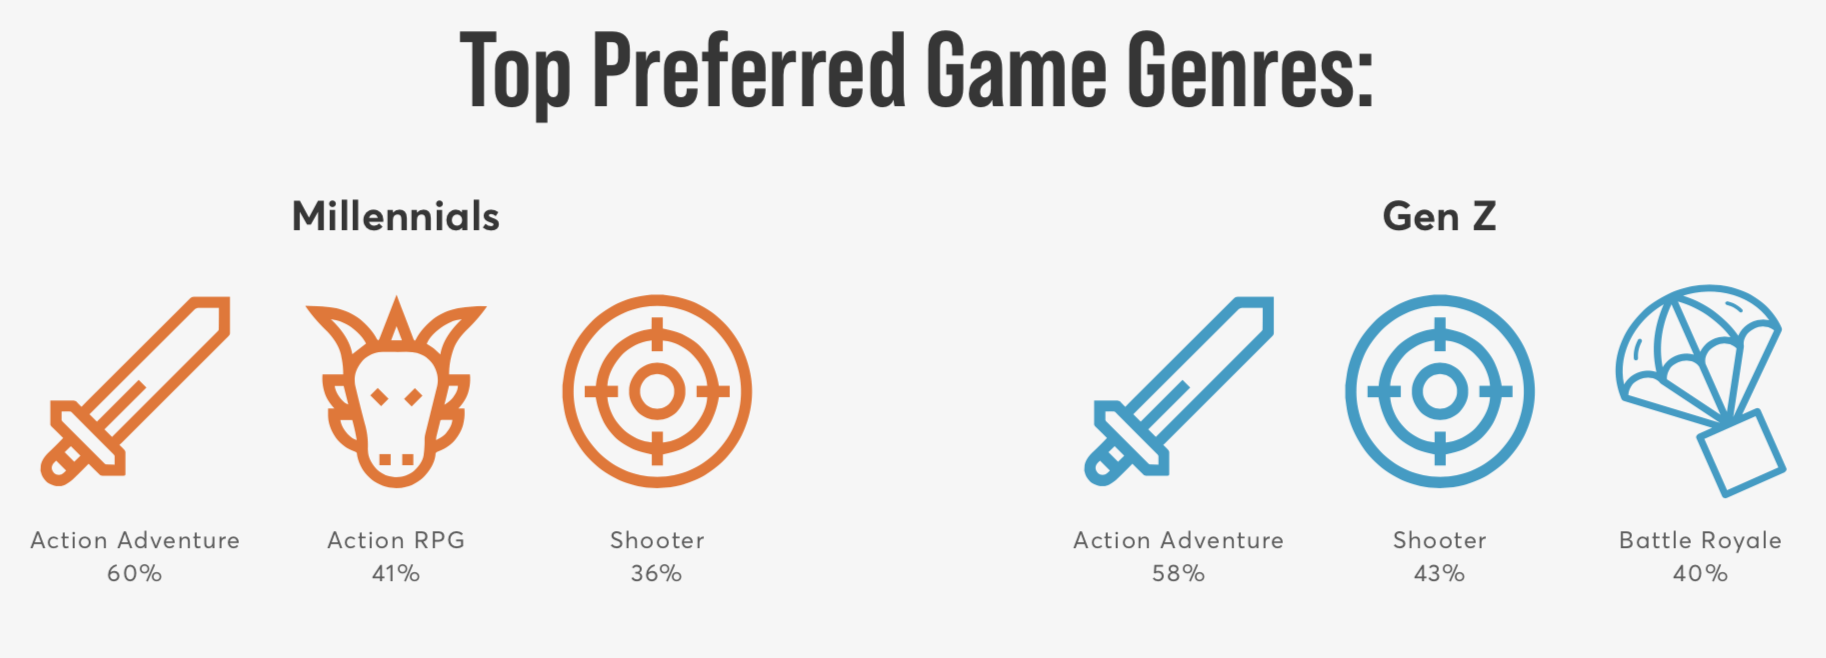 Preferred game genres for Millennials and Gen Z